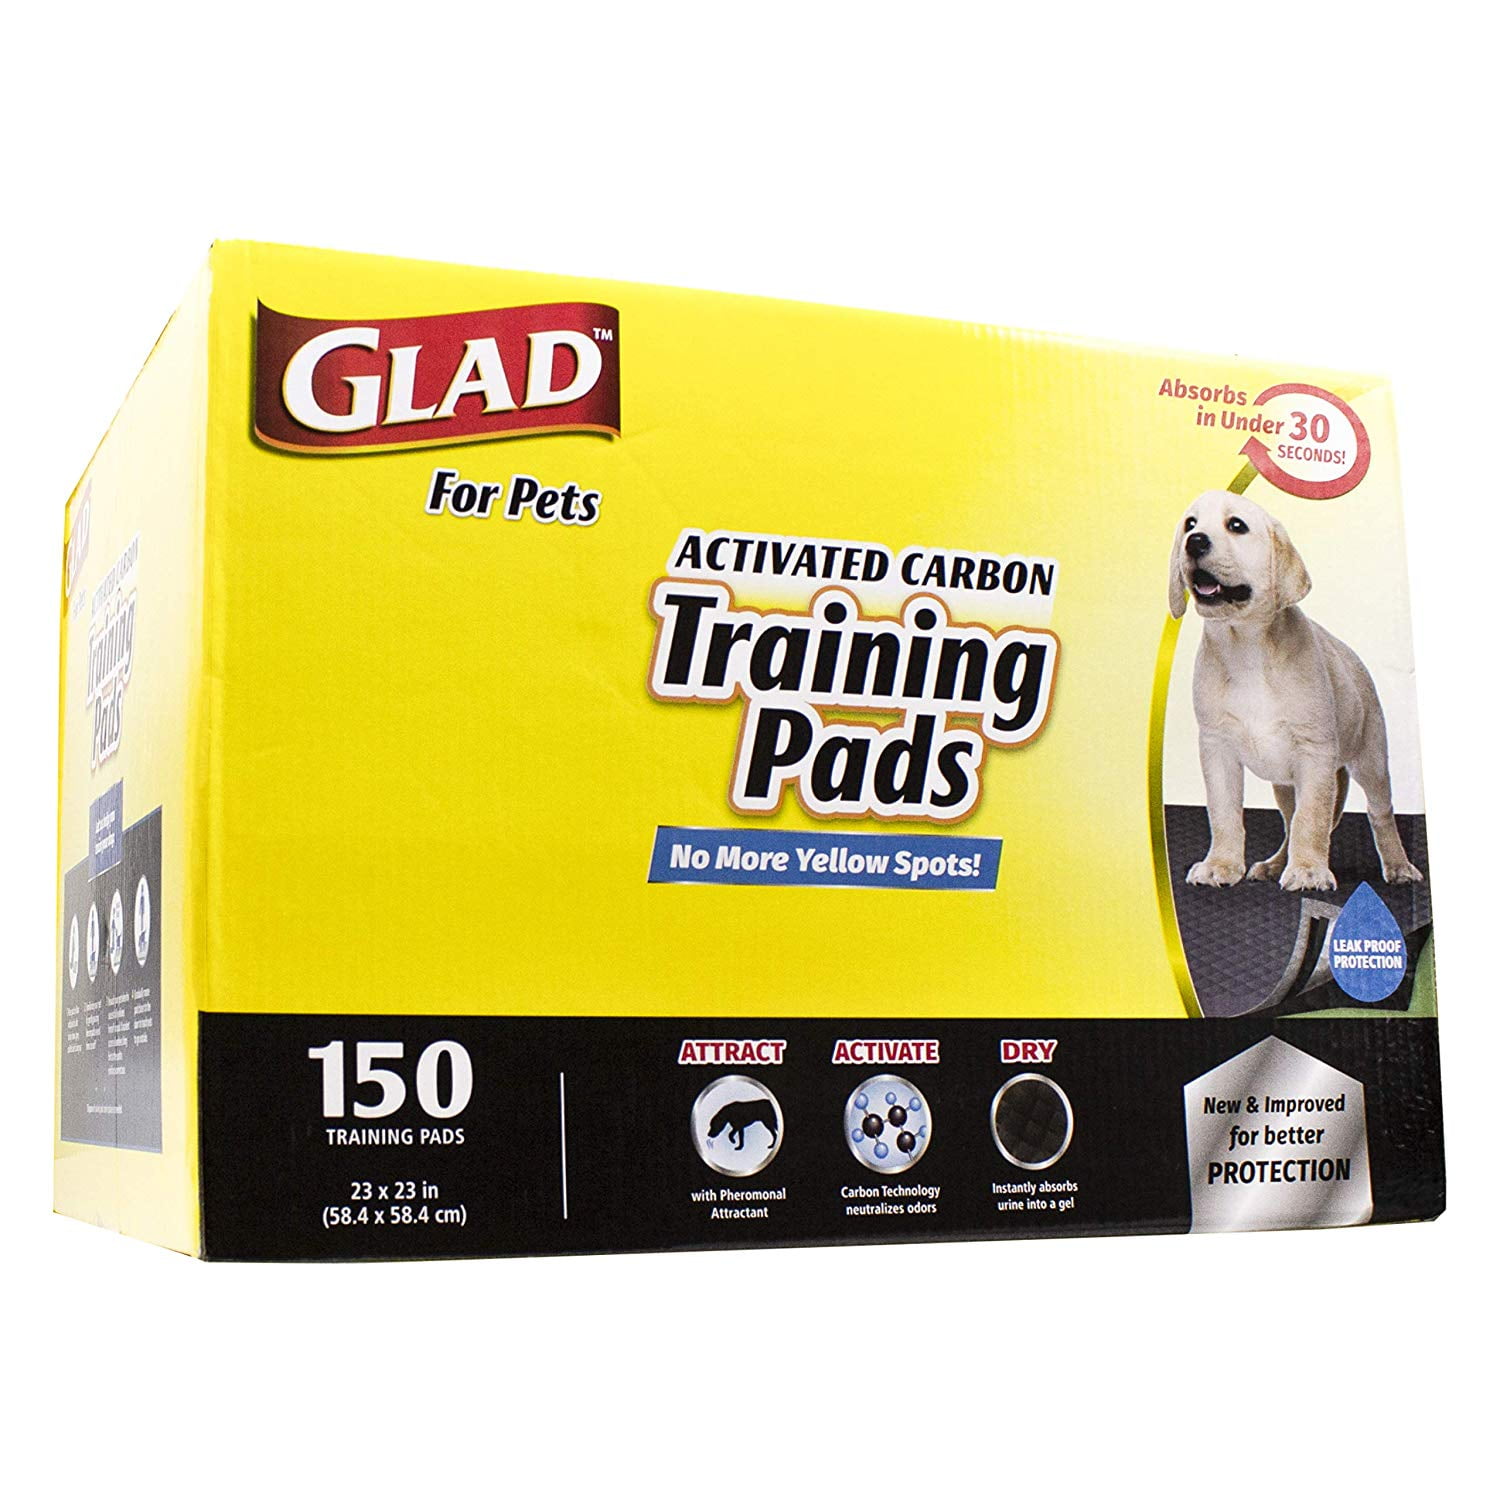 Black Charcoal Puppy Pads Puppy Potty Training Pads That